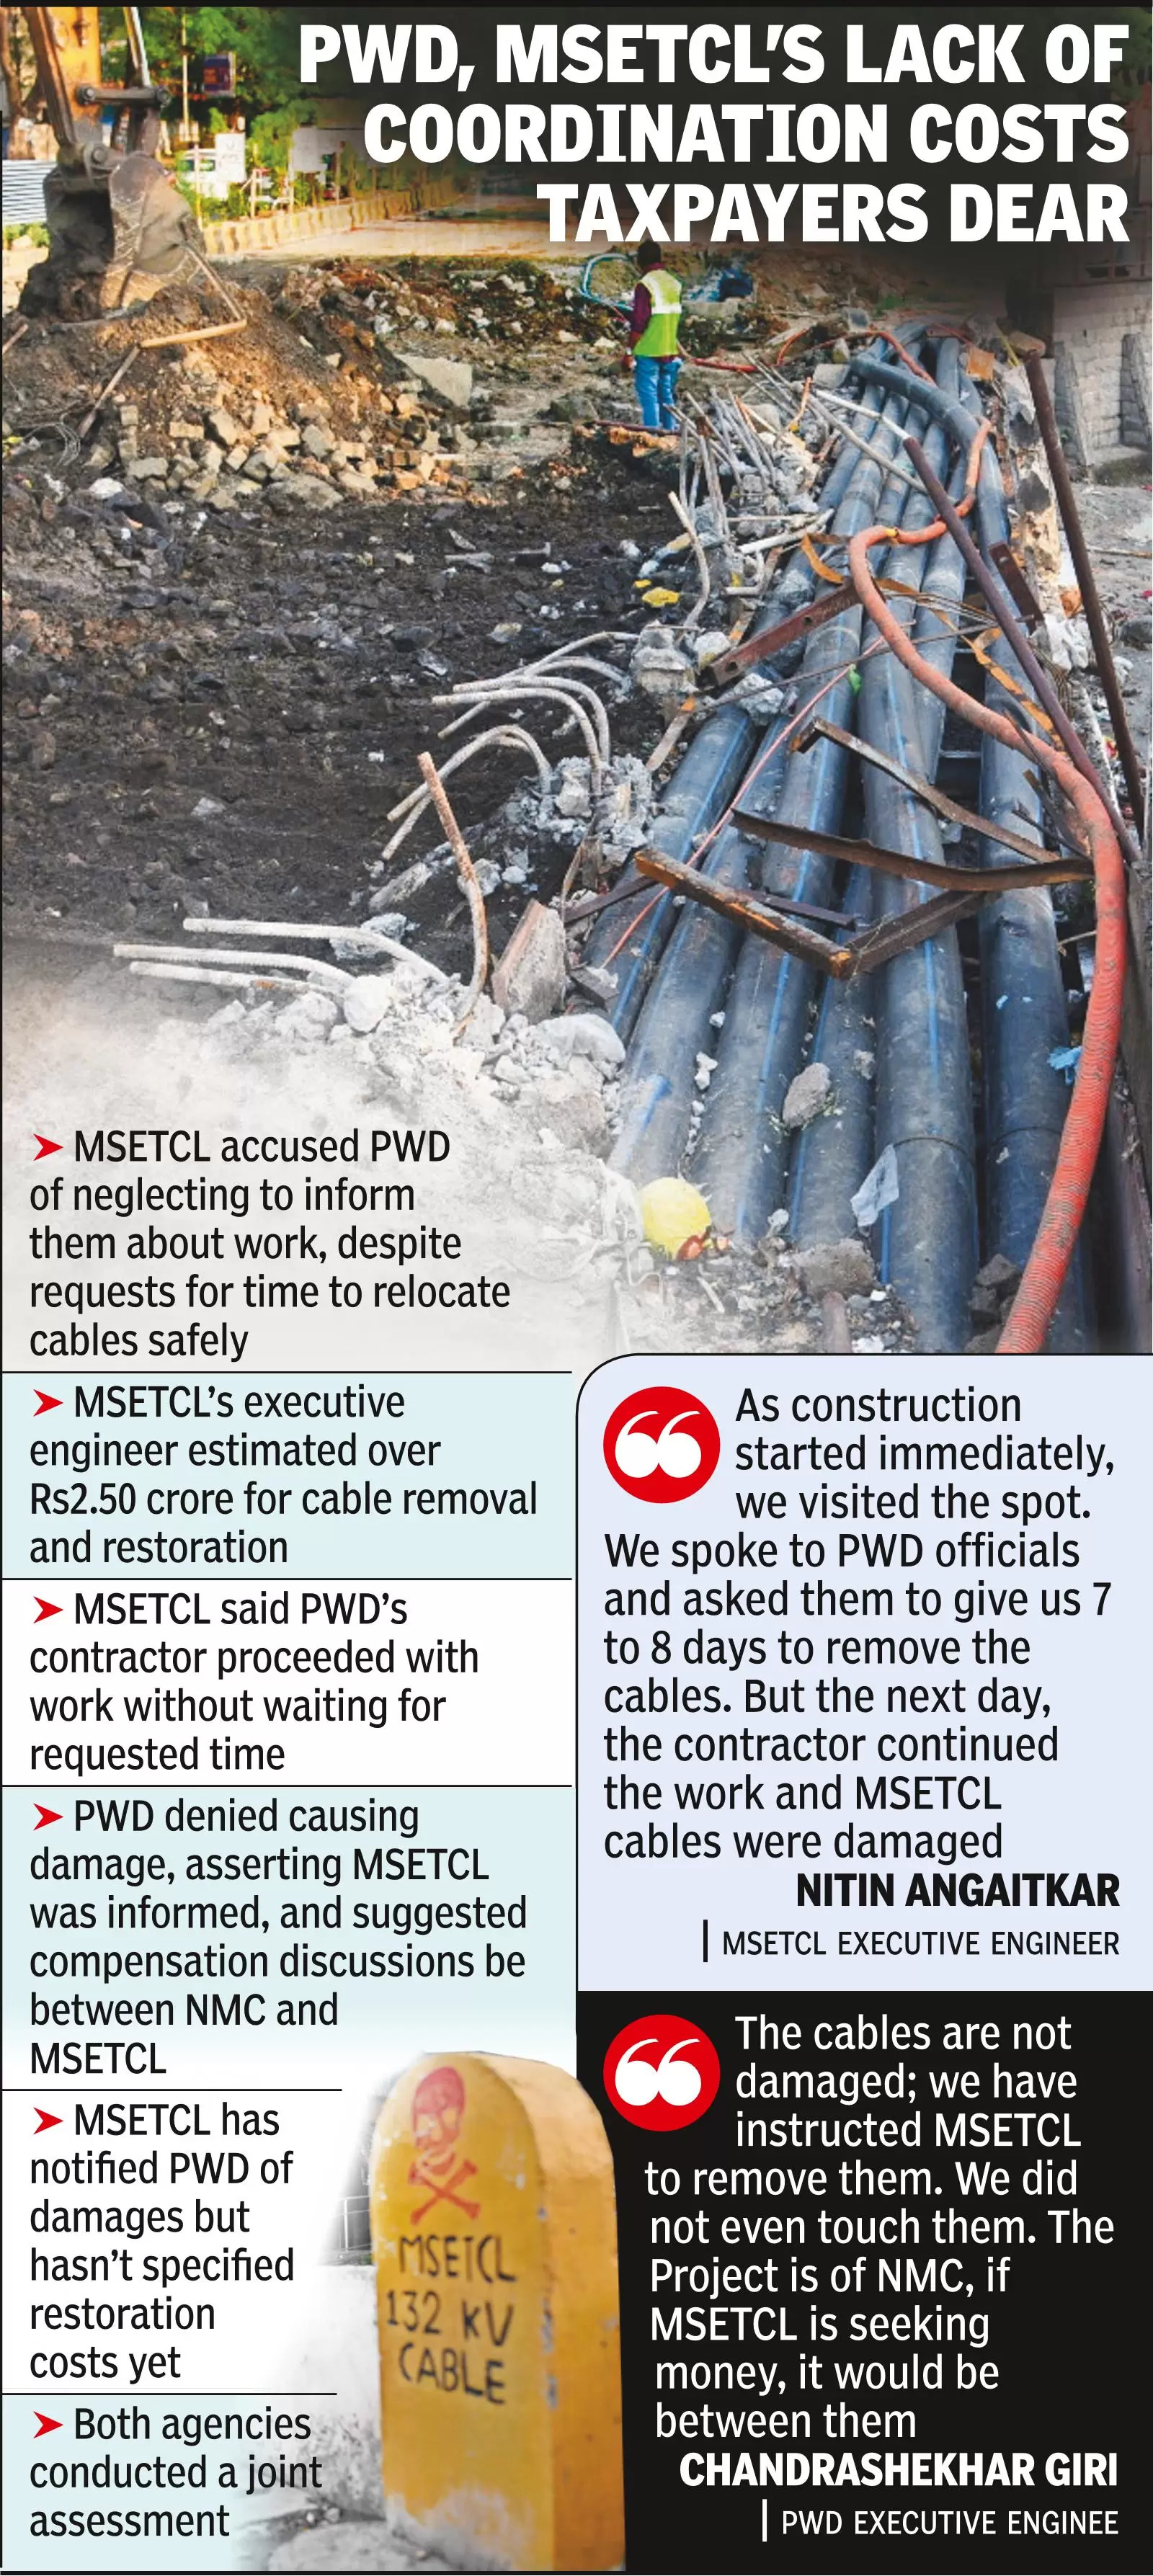 Cables damaged: Bridge cost shoots up by ₹2.5cr